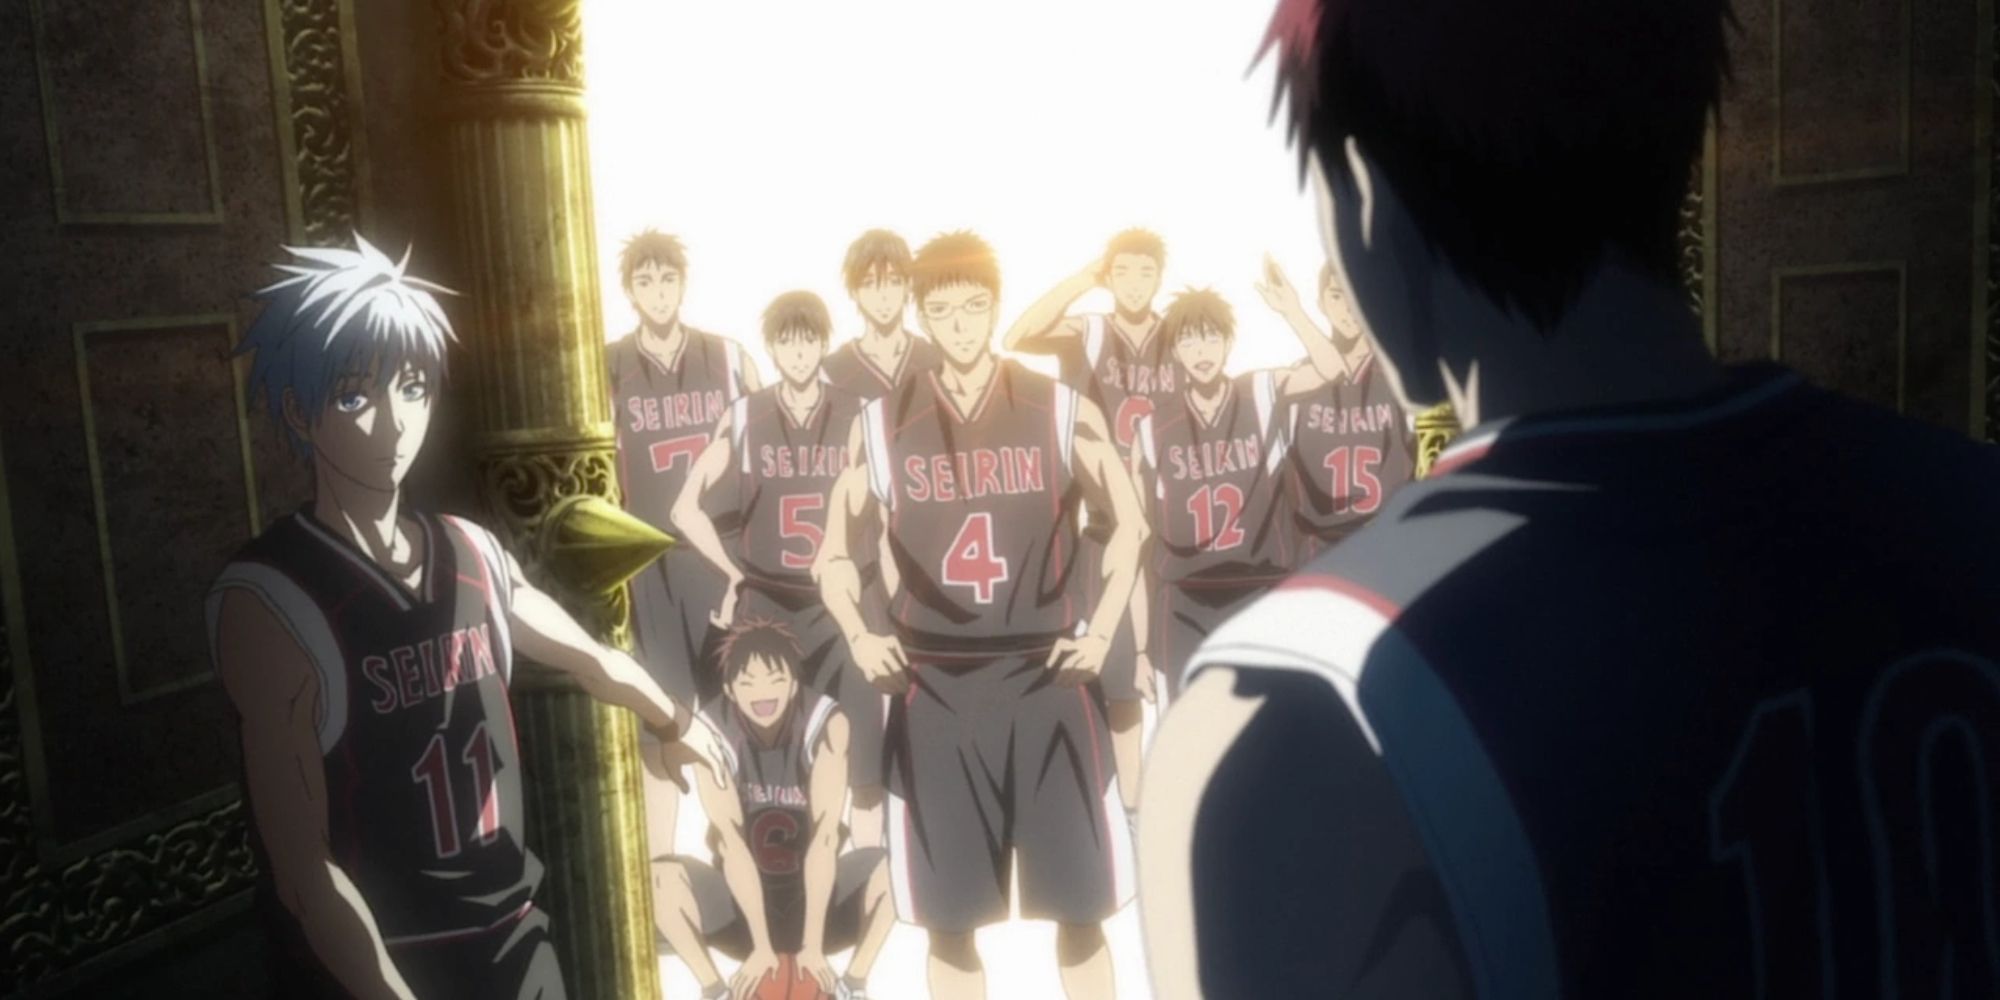 12 Recommendations for Sports Genre Anime in 2022 with Full of Spirit,  Teamwork - Motivating